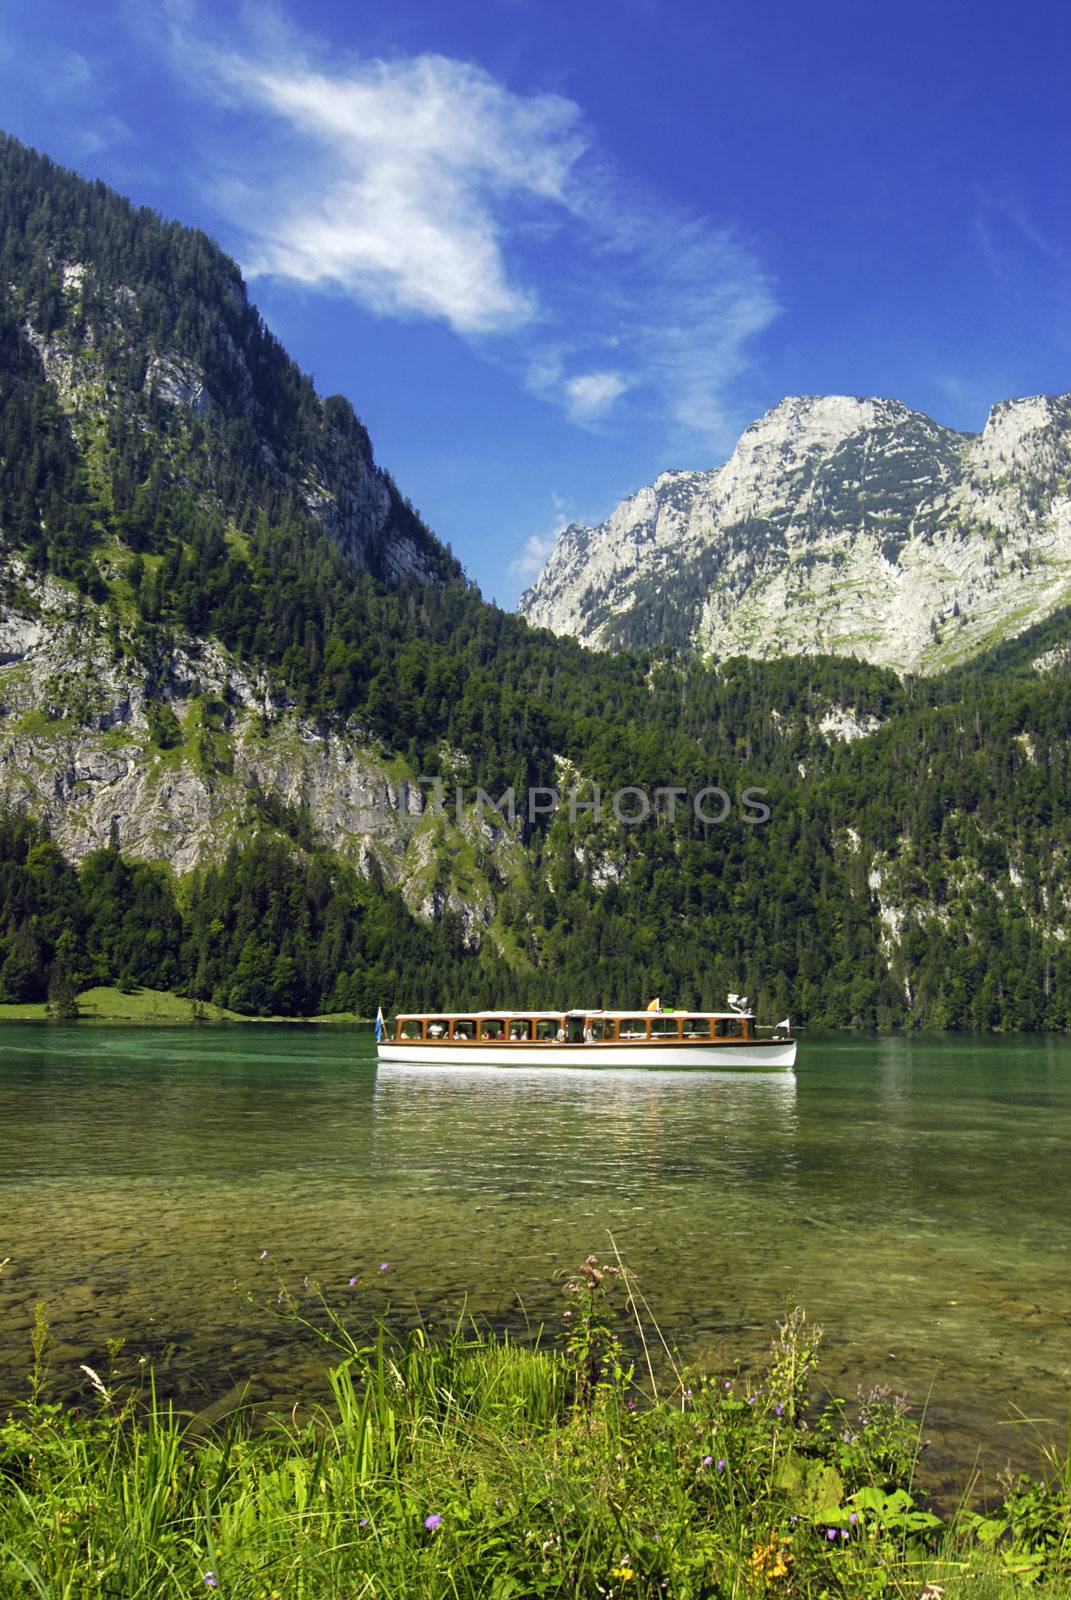 Sightseeing boat on the Kings lake in Germany with Alps in the back